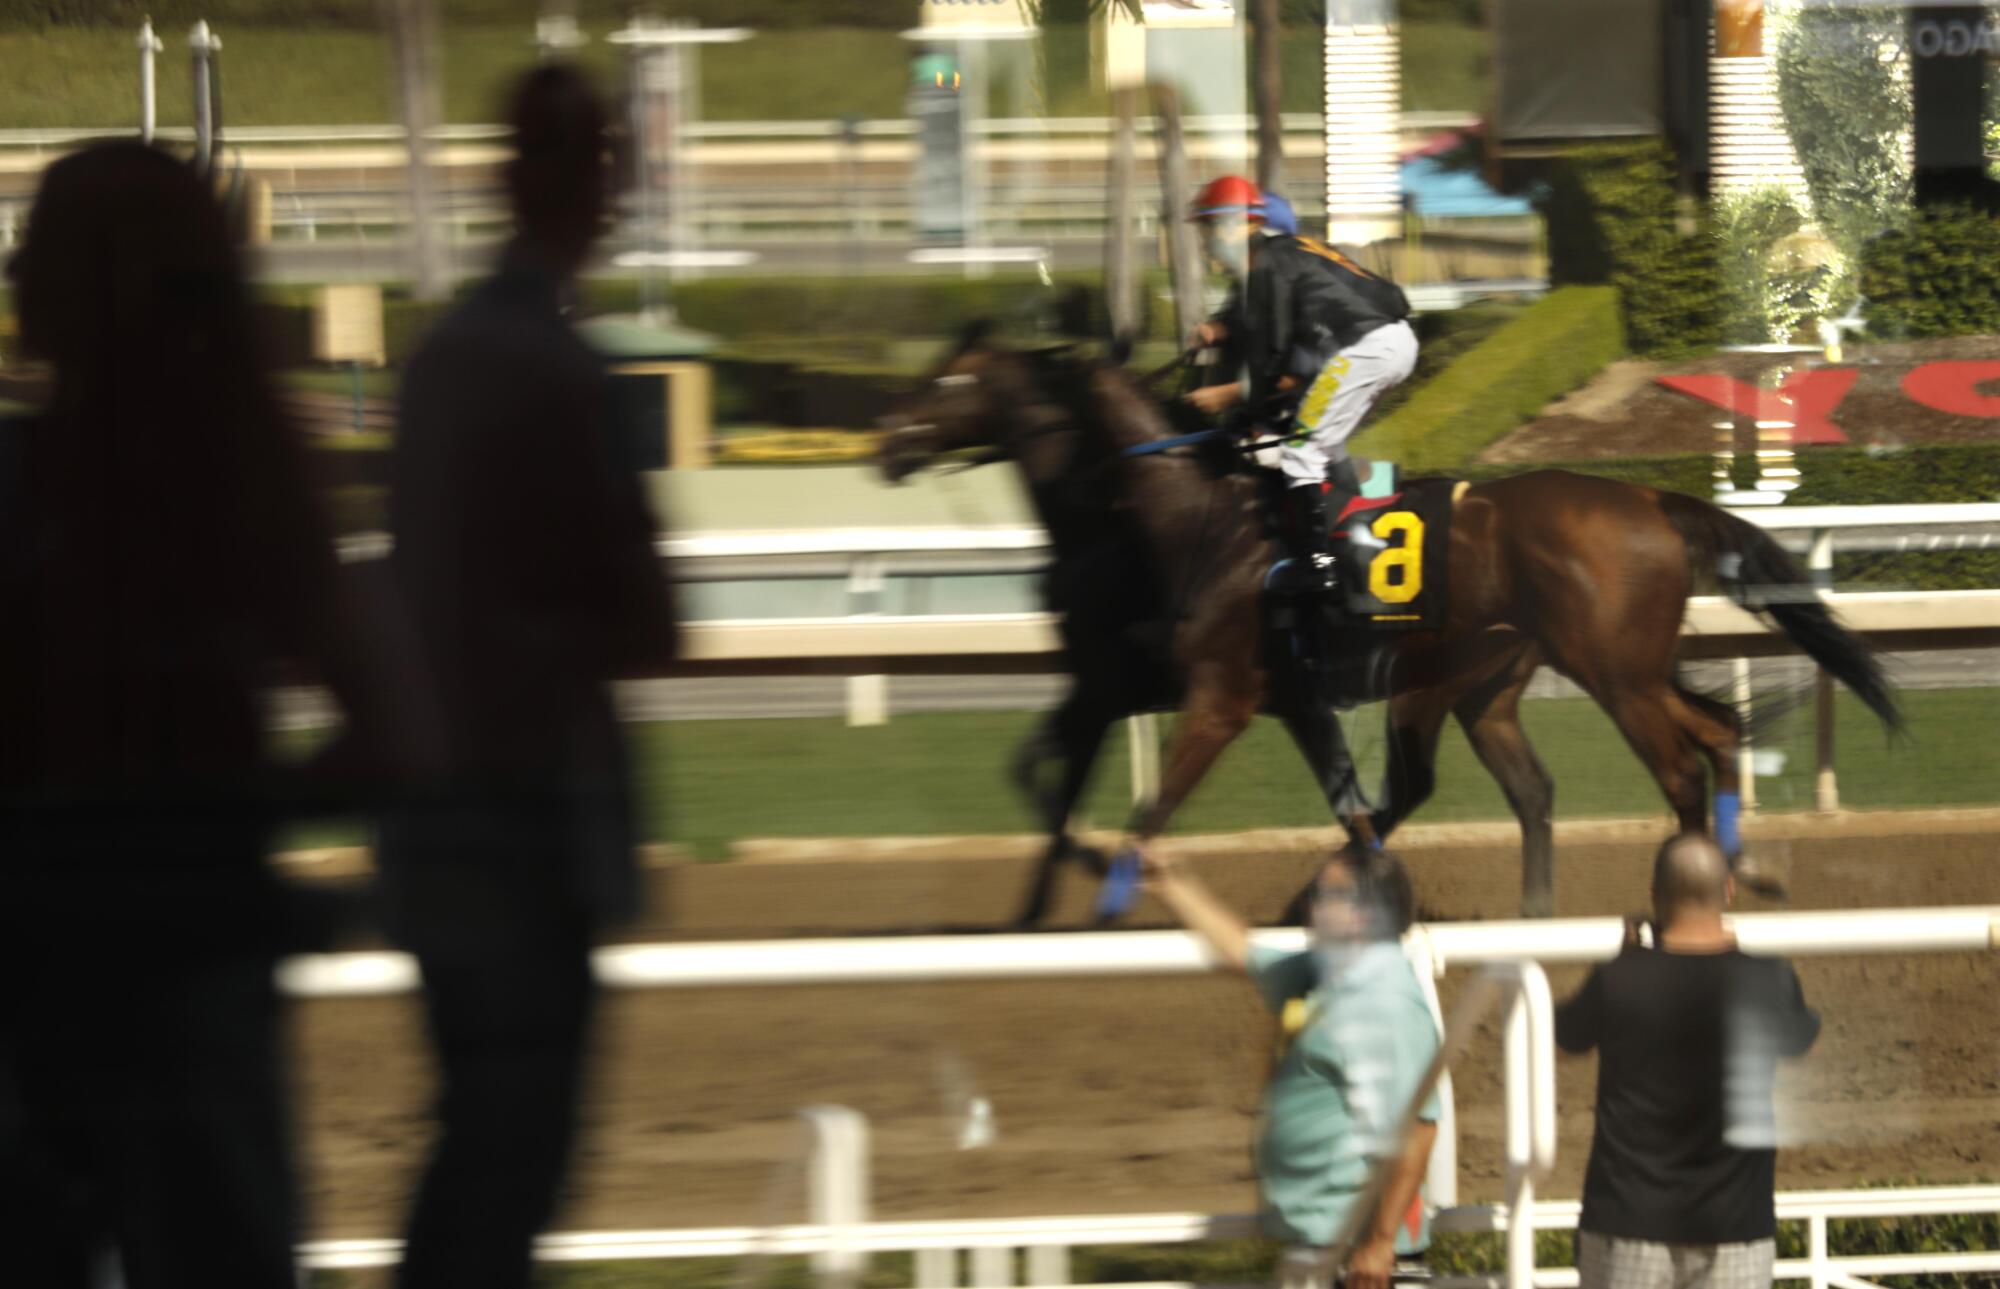 Jockey Tyler Blaze, in a reflection, rides onto the track for the third race on opening day at Santa Anita Park.